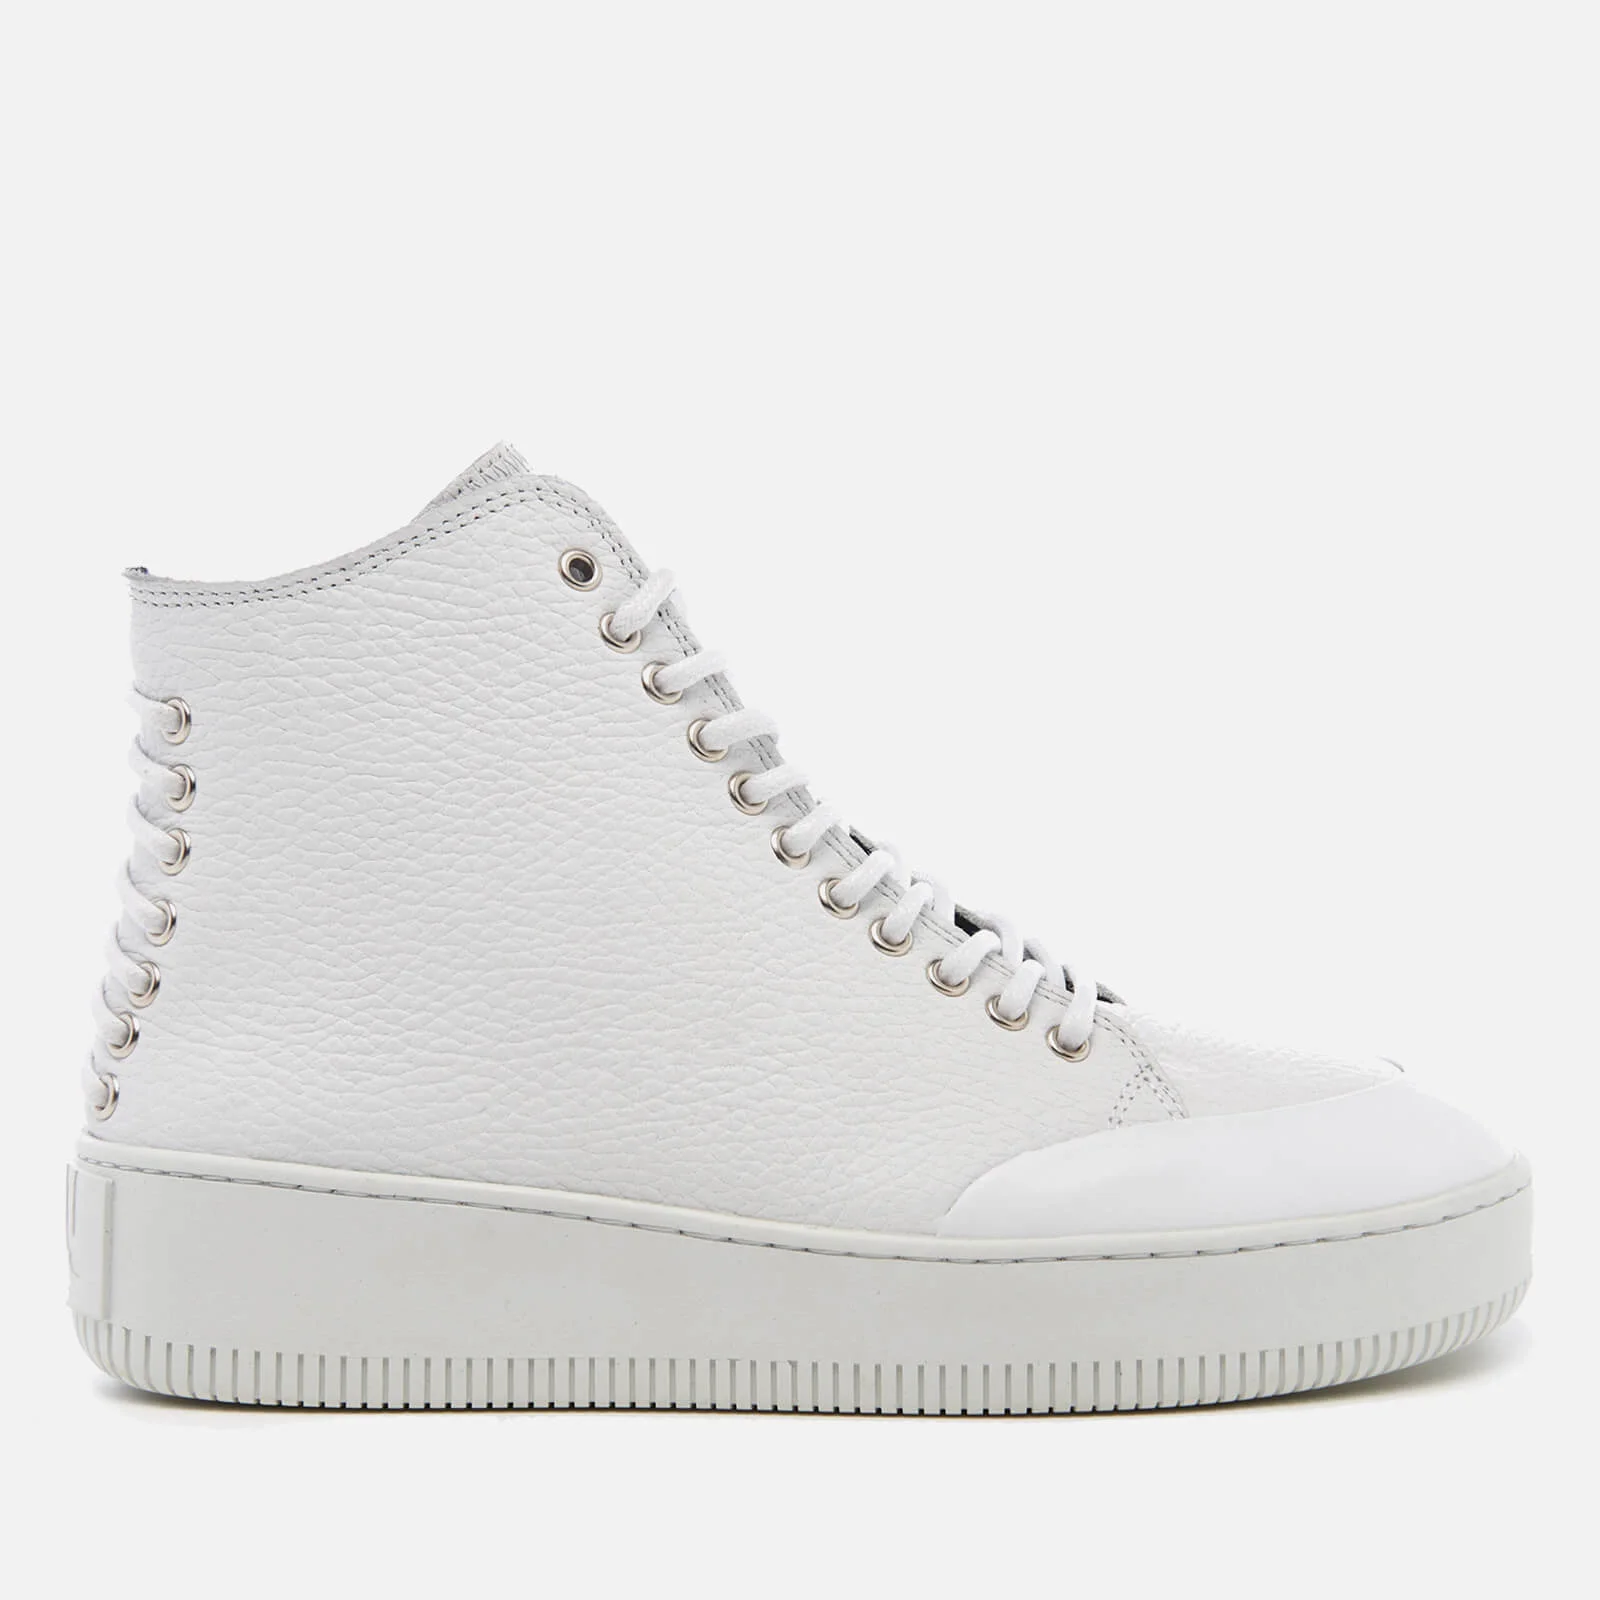 McQ Alexander McQueen Women's Netil Laced Eyelets Leather Hi-Top Trainers - White Image 1